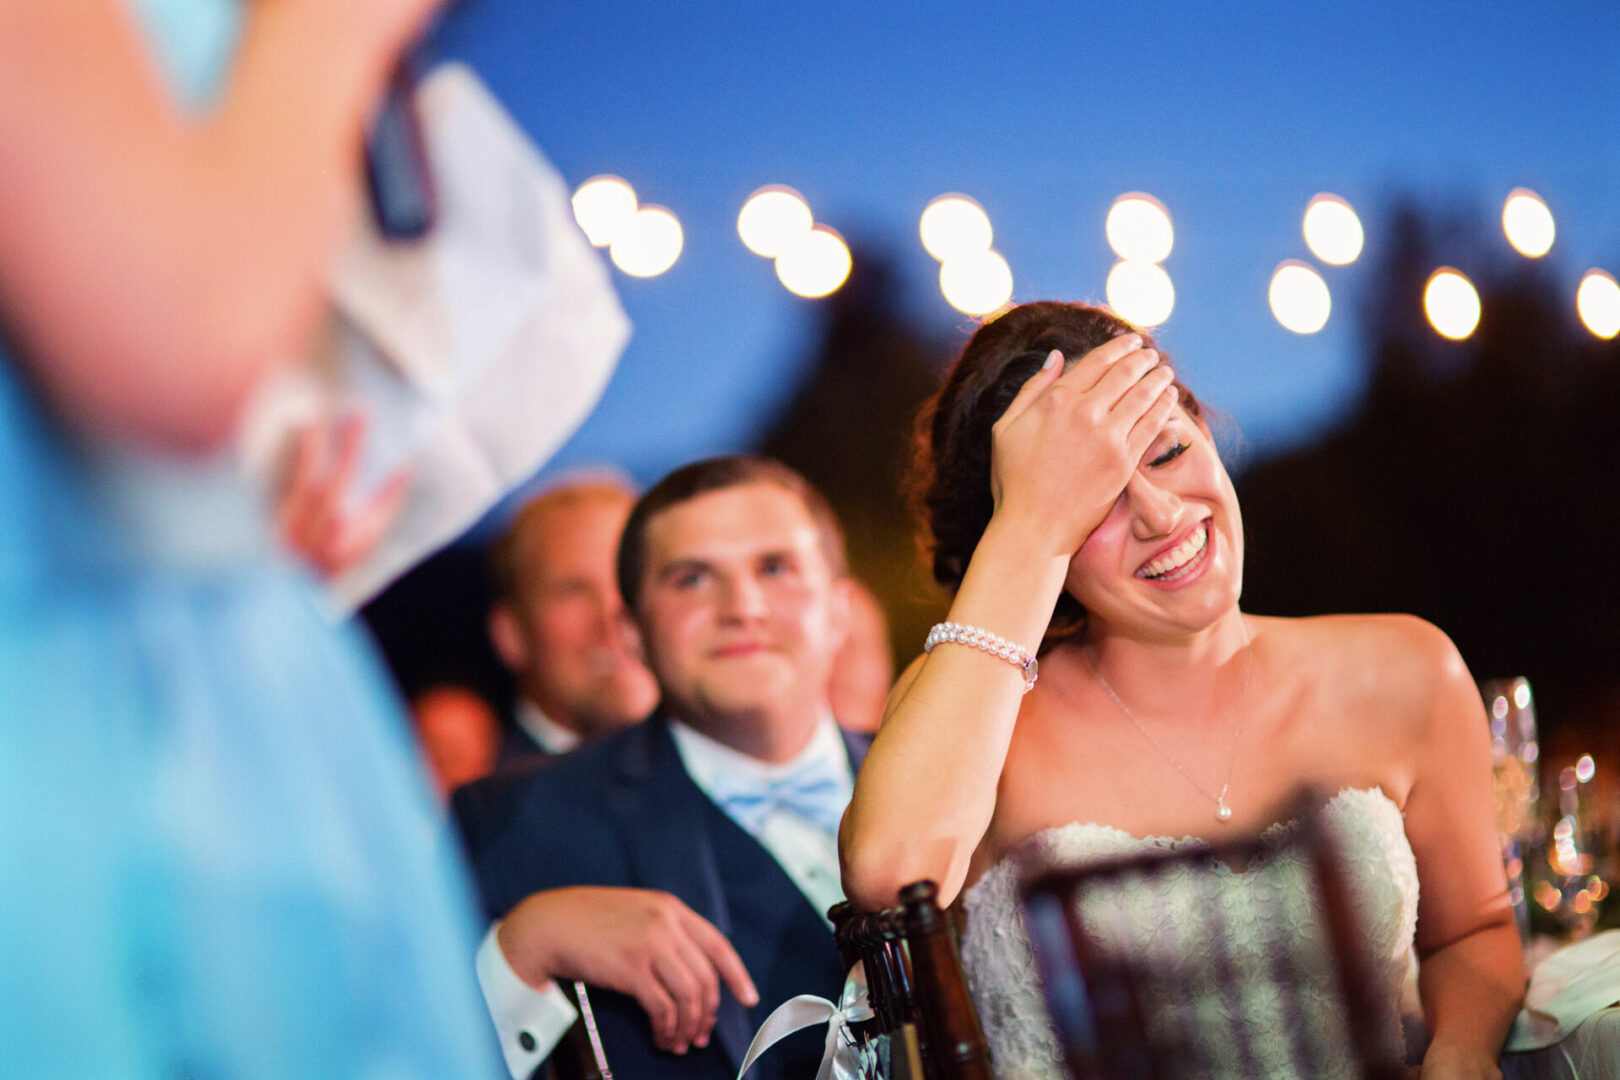 Close up shot of a girl laughing at a party